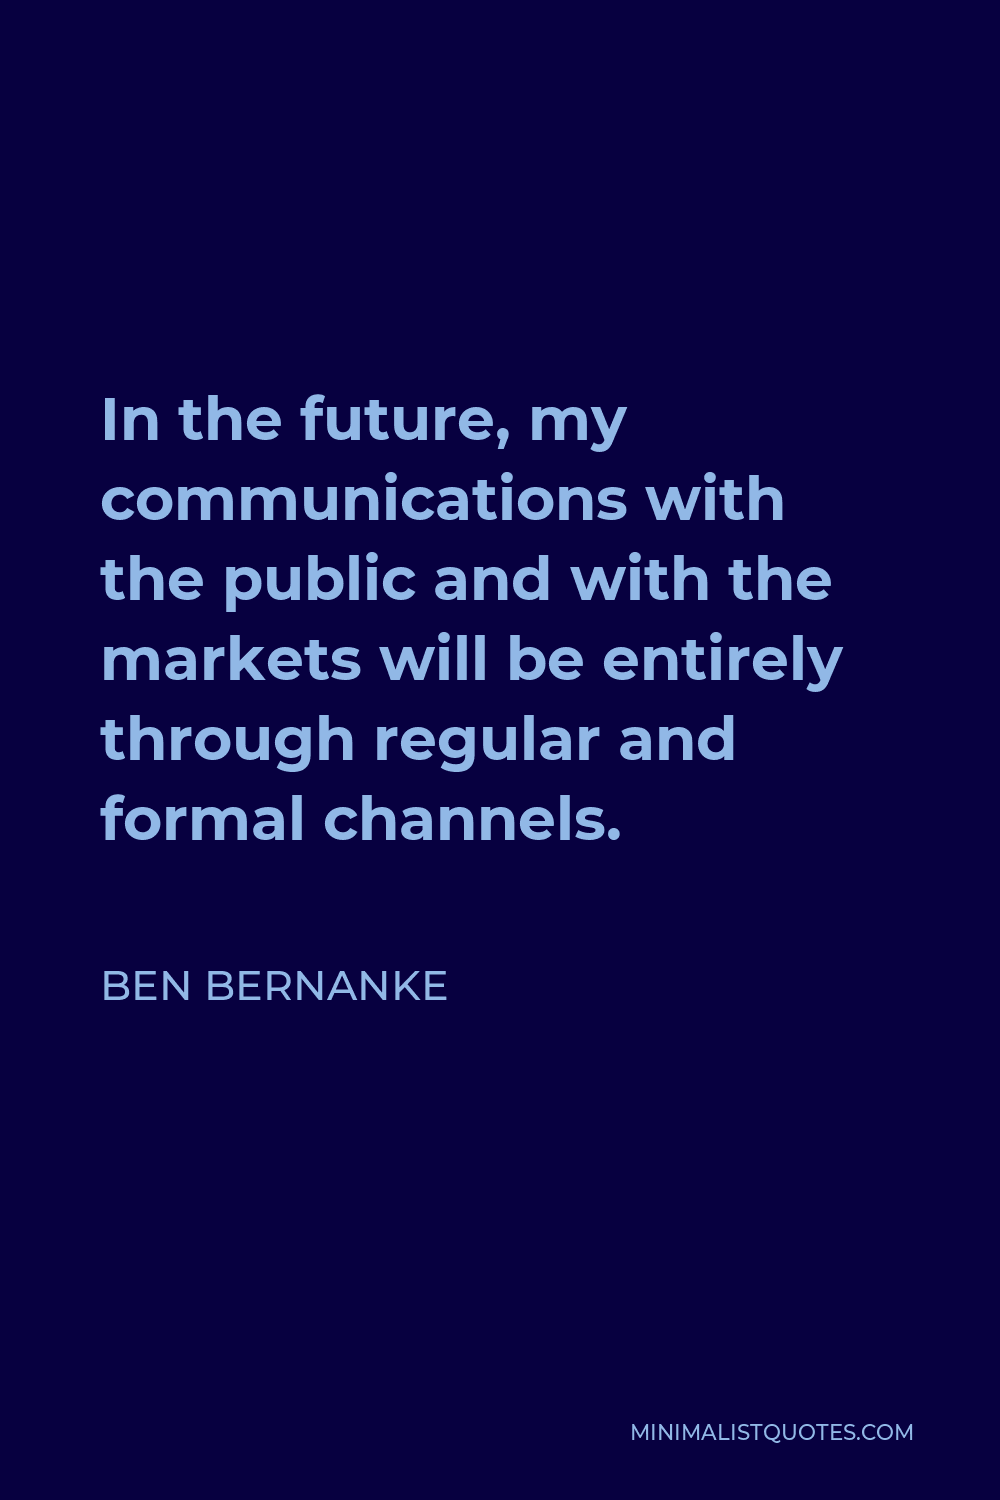 Ben Bernanke Quote - In the future, my communications with the public and with the markets will be entirely through regular and formal channels.